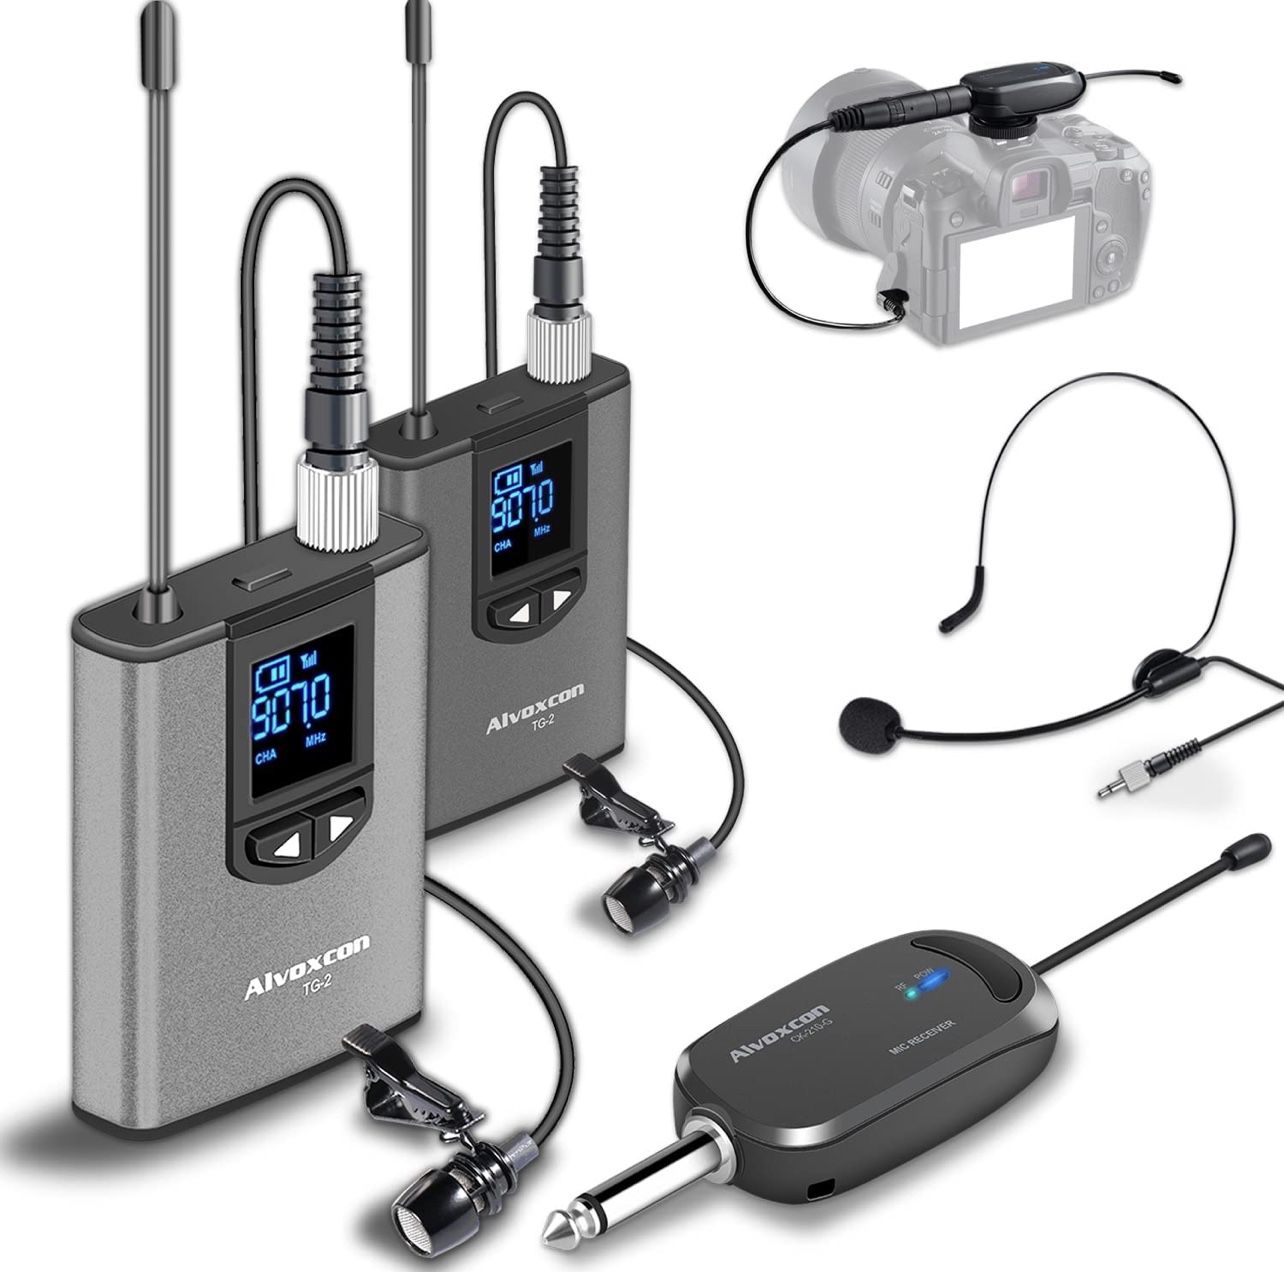 Wireless Headset Lavalier Microphone System -Alvoxcon Dual Wireless Lapel Mic for iPhone, DSLR Camera, PA Speaker, YouTube, Podcast, Video Recording, 